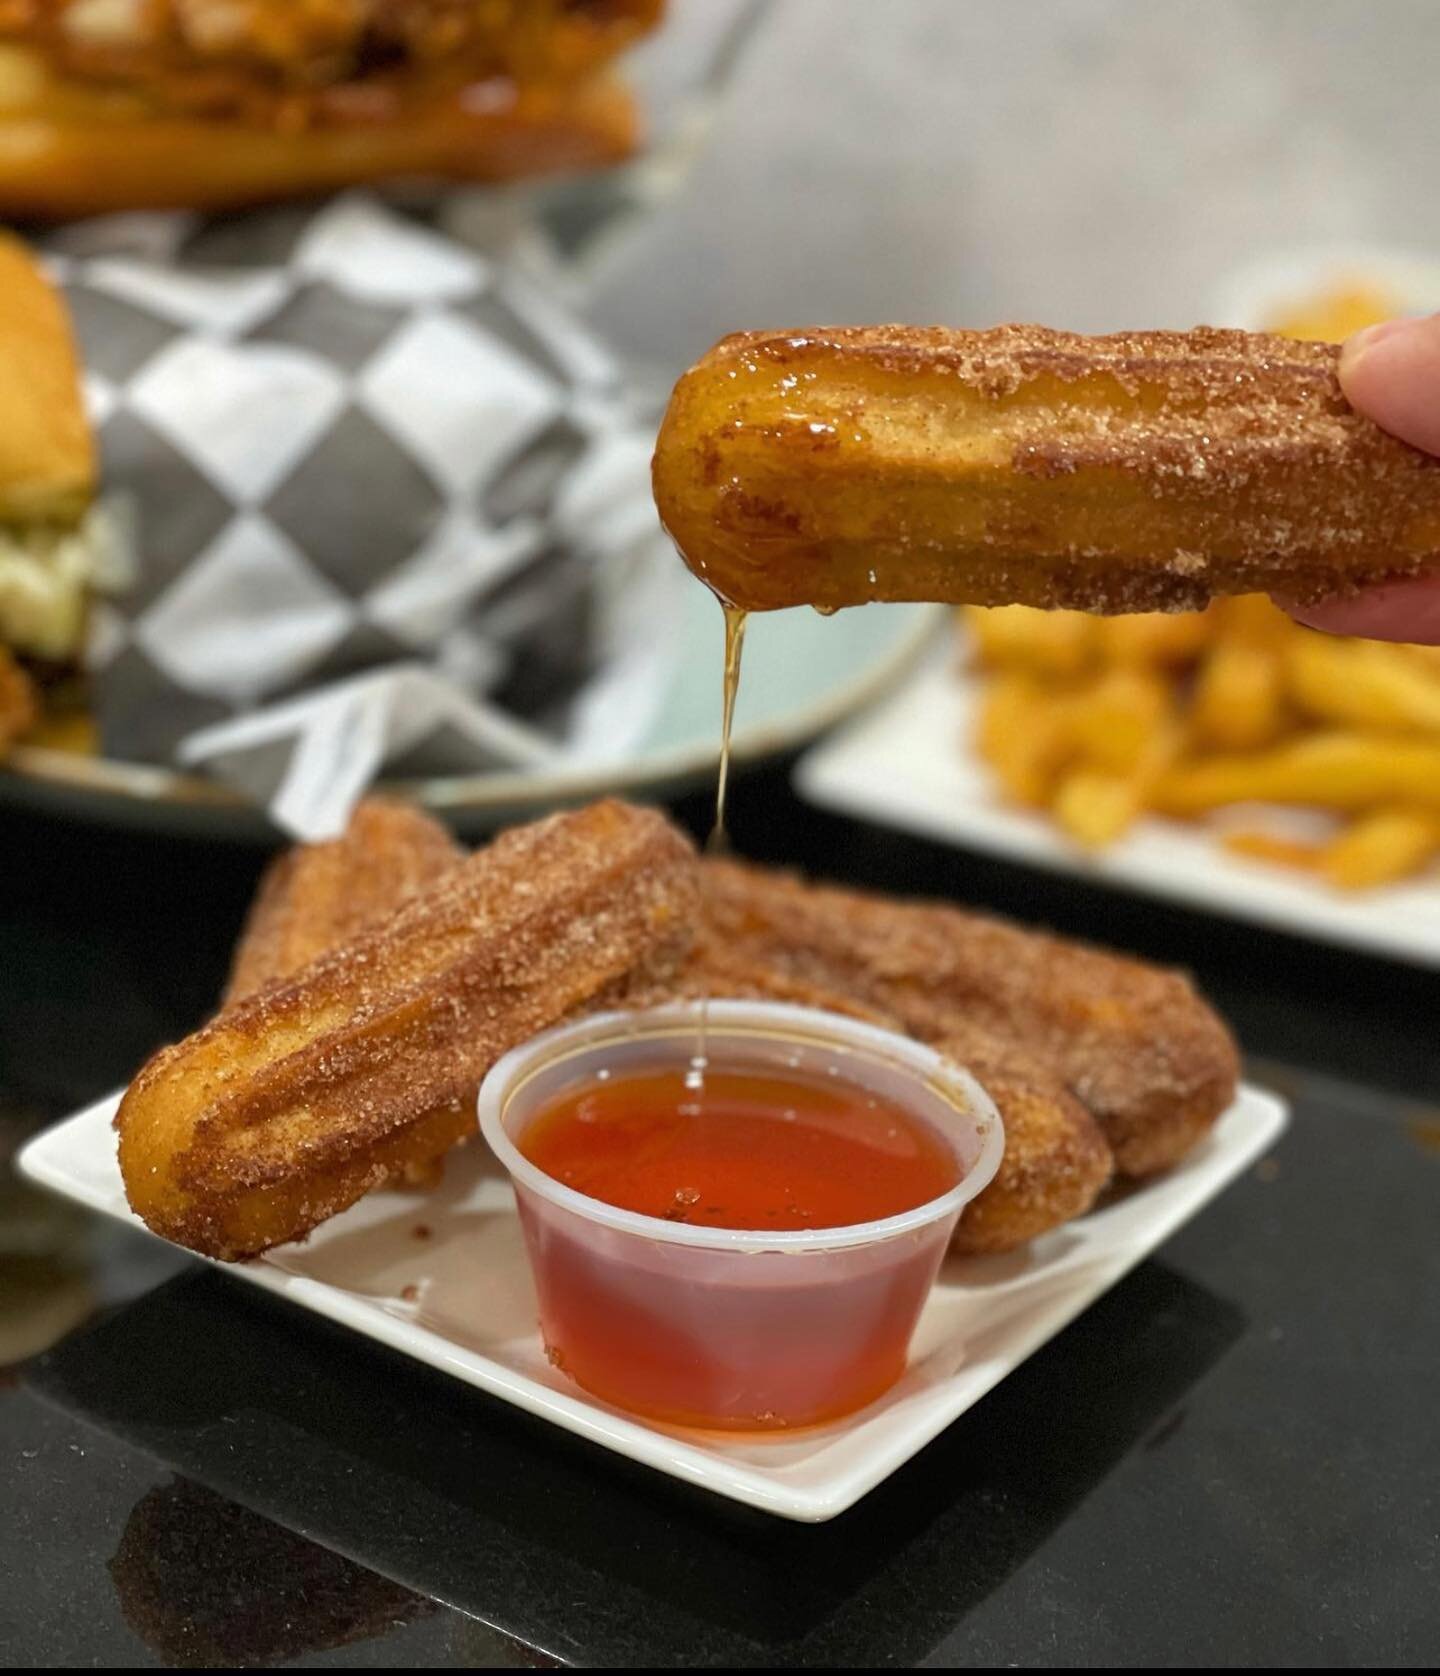 @letseatwithv woke up and chose Lil Churros! All churro orders come with a side of Hot Honey. Are you picking Cinnamon or Mexican Chocolate sugar? 🤤 #loveburnchicken #lilchurros #myloveisonfire #letitburn